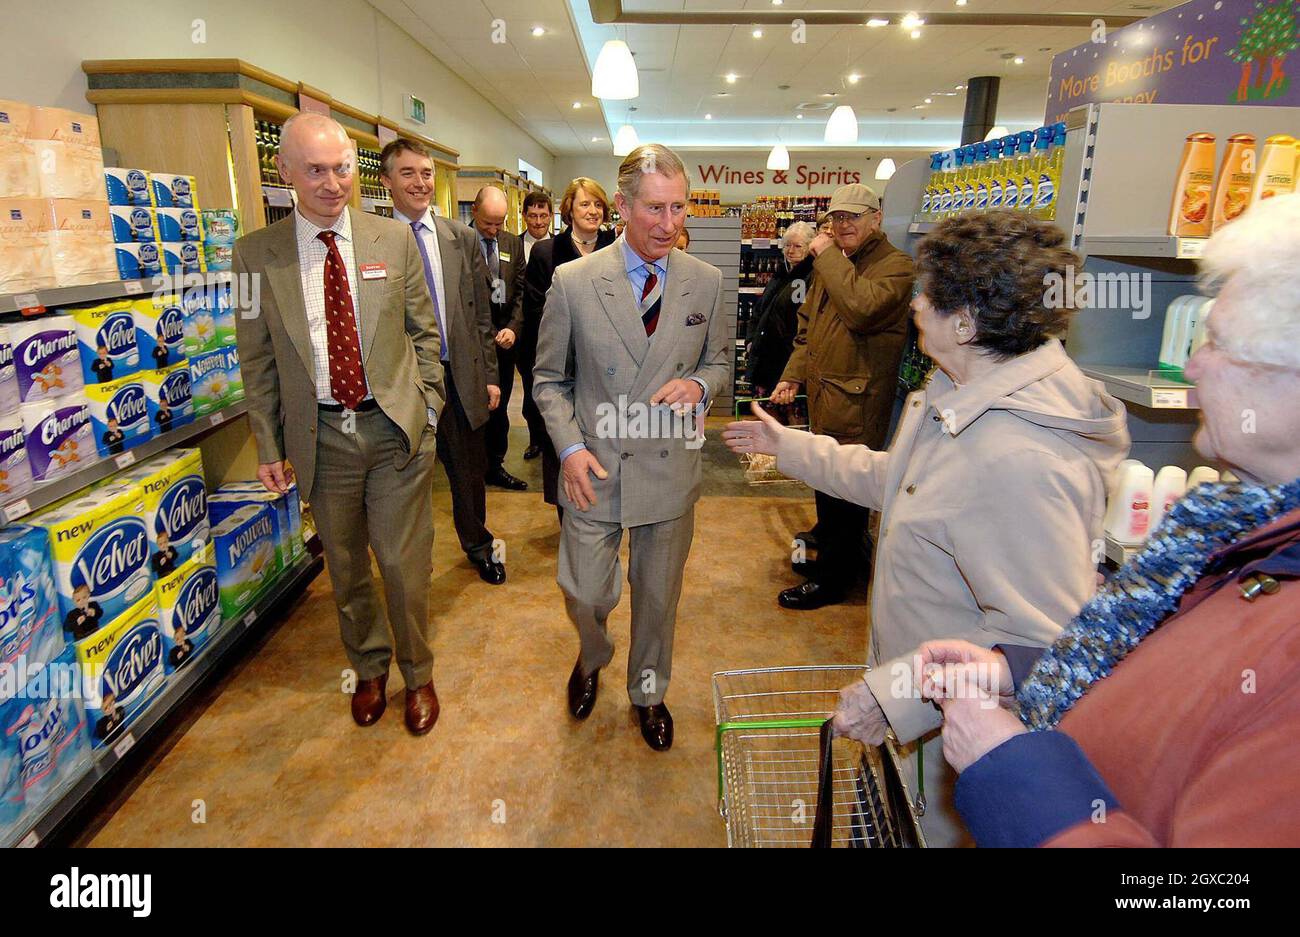 Prince Charles, Prince of Wales talks to a customer during a visit to a supermarket in Keswick, Cumbria, which is committed to local sourcing of produce, meeting suppliers and local farmers on February 5, 2007. Anwar Hussein/EMPICS Entertainment  Stock Photo